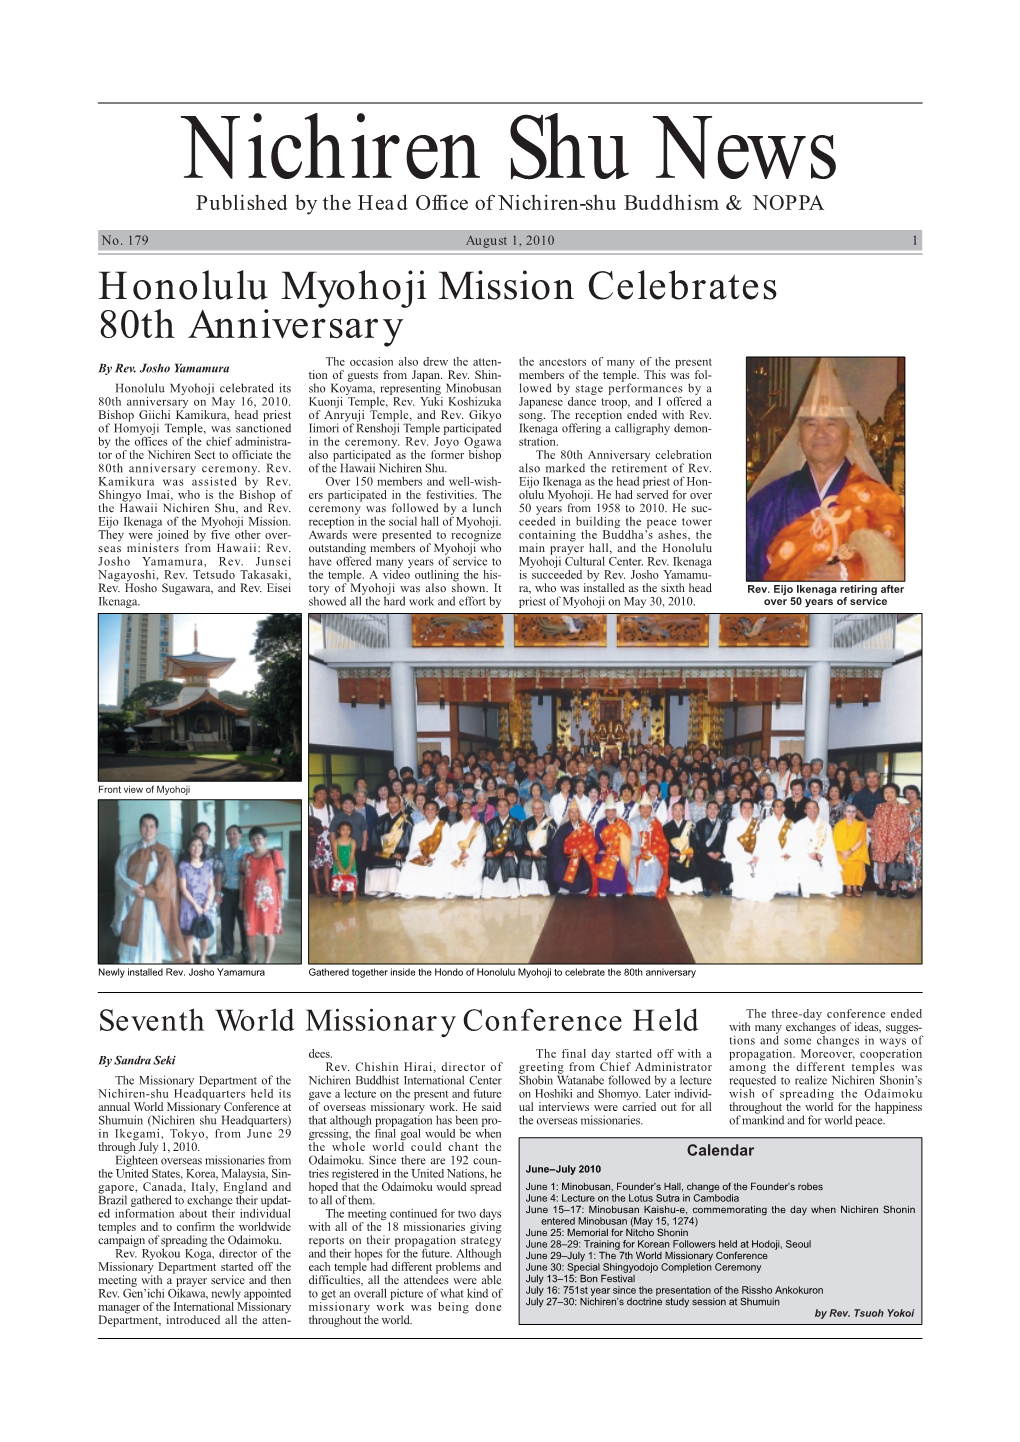 Honolulu Myohoji Mission Celebrates 80Th Anniversary the Occasion Also Drew the Atten- the Ancestors of Many of the Present by Rev